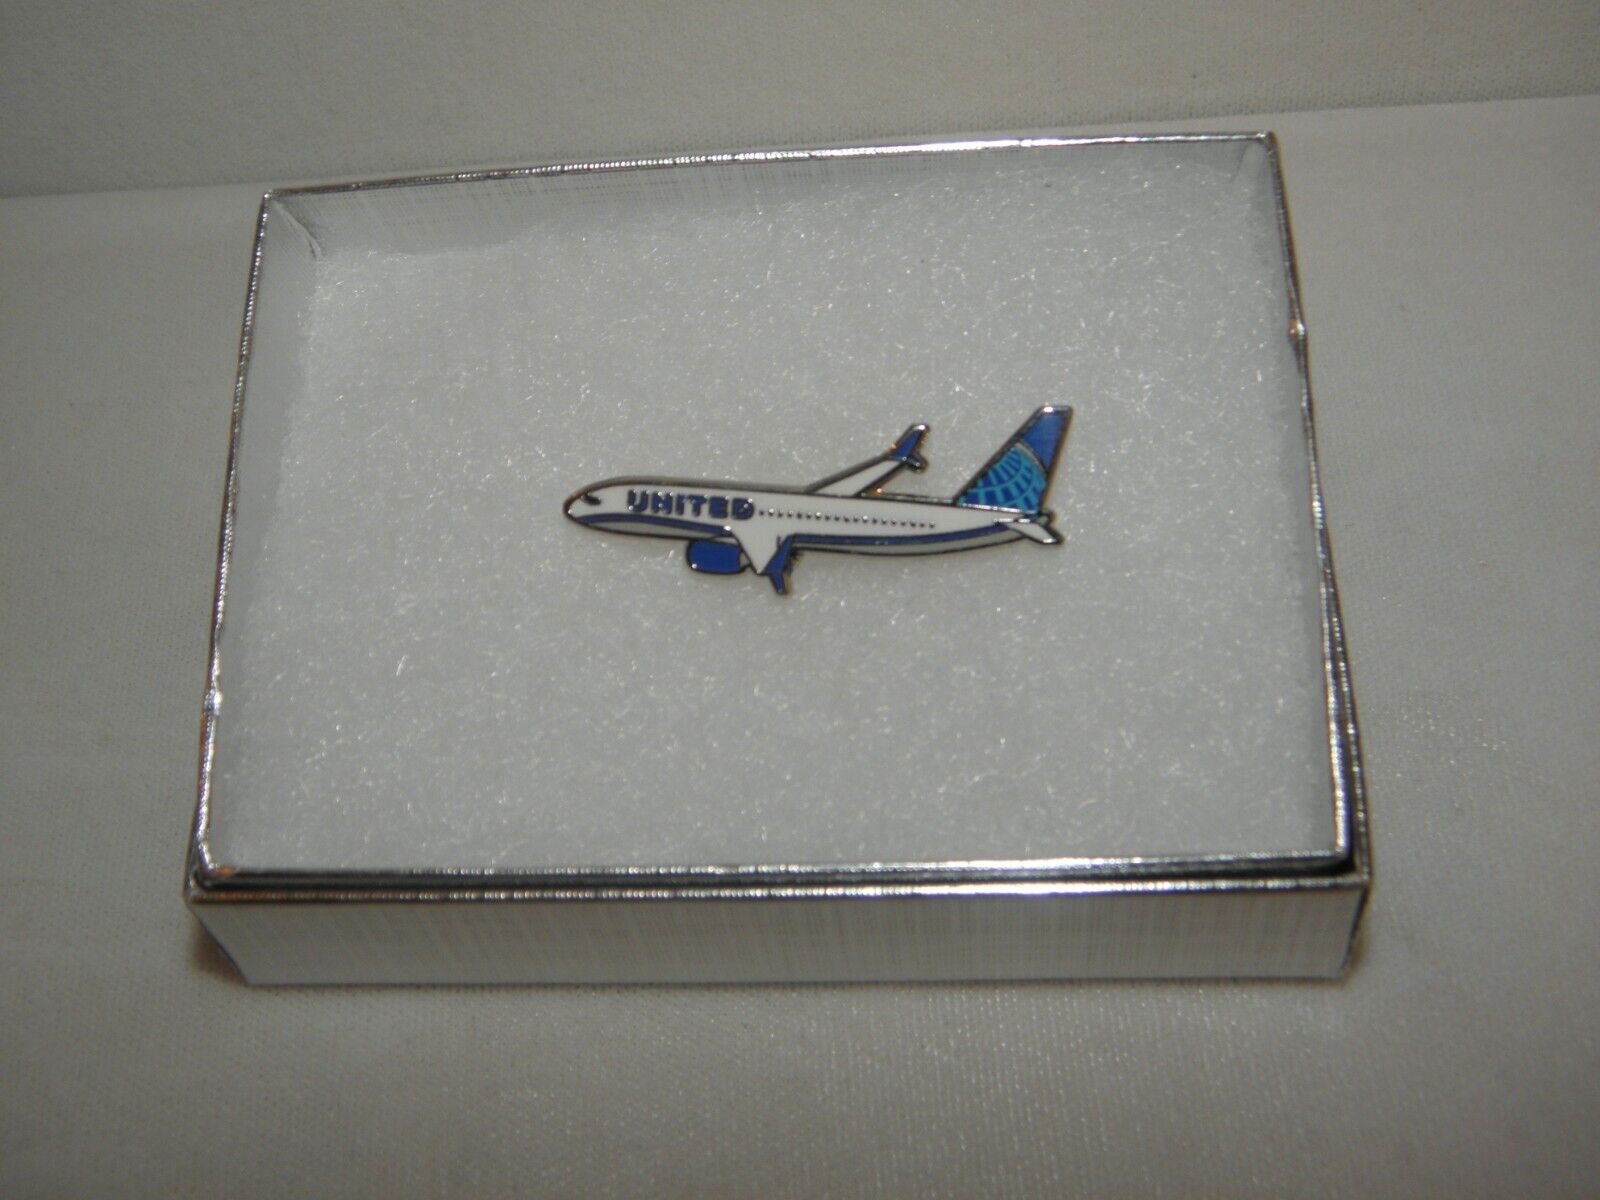 UNITED AIRLINES BOEING 737  AIRPLANE TACK PIN CONTINENTAL UAL PILOT GIFT 